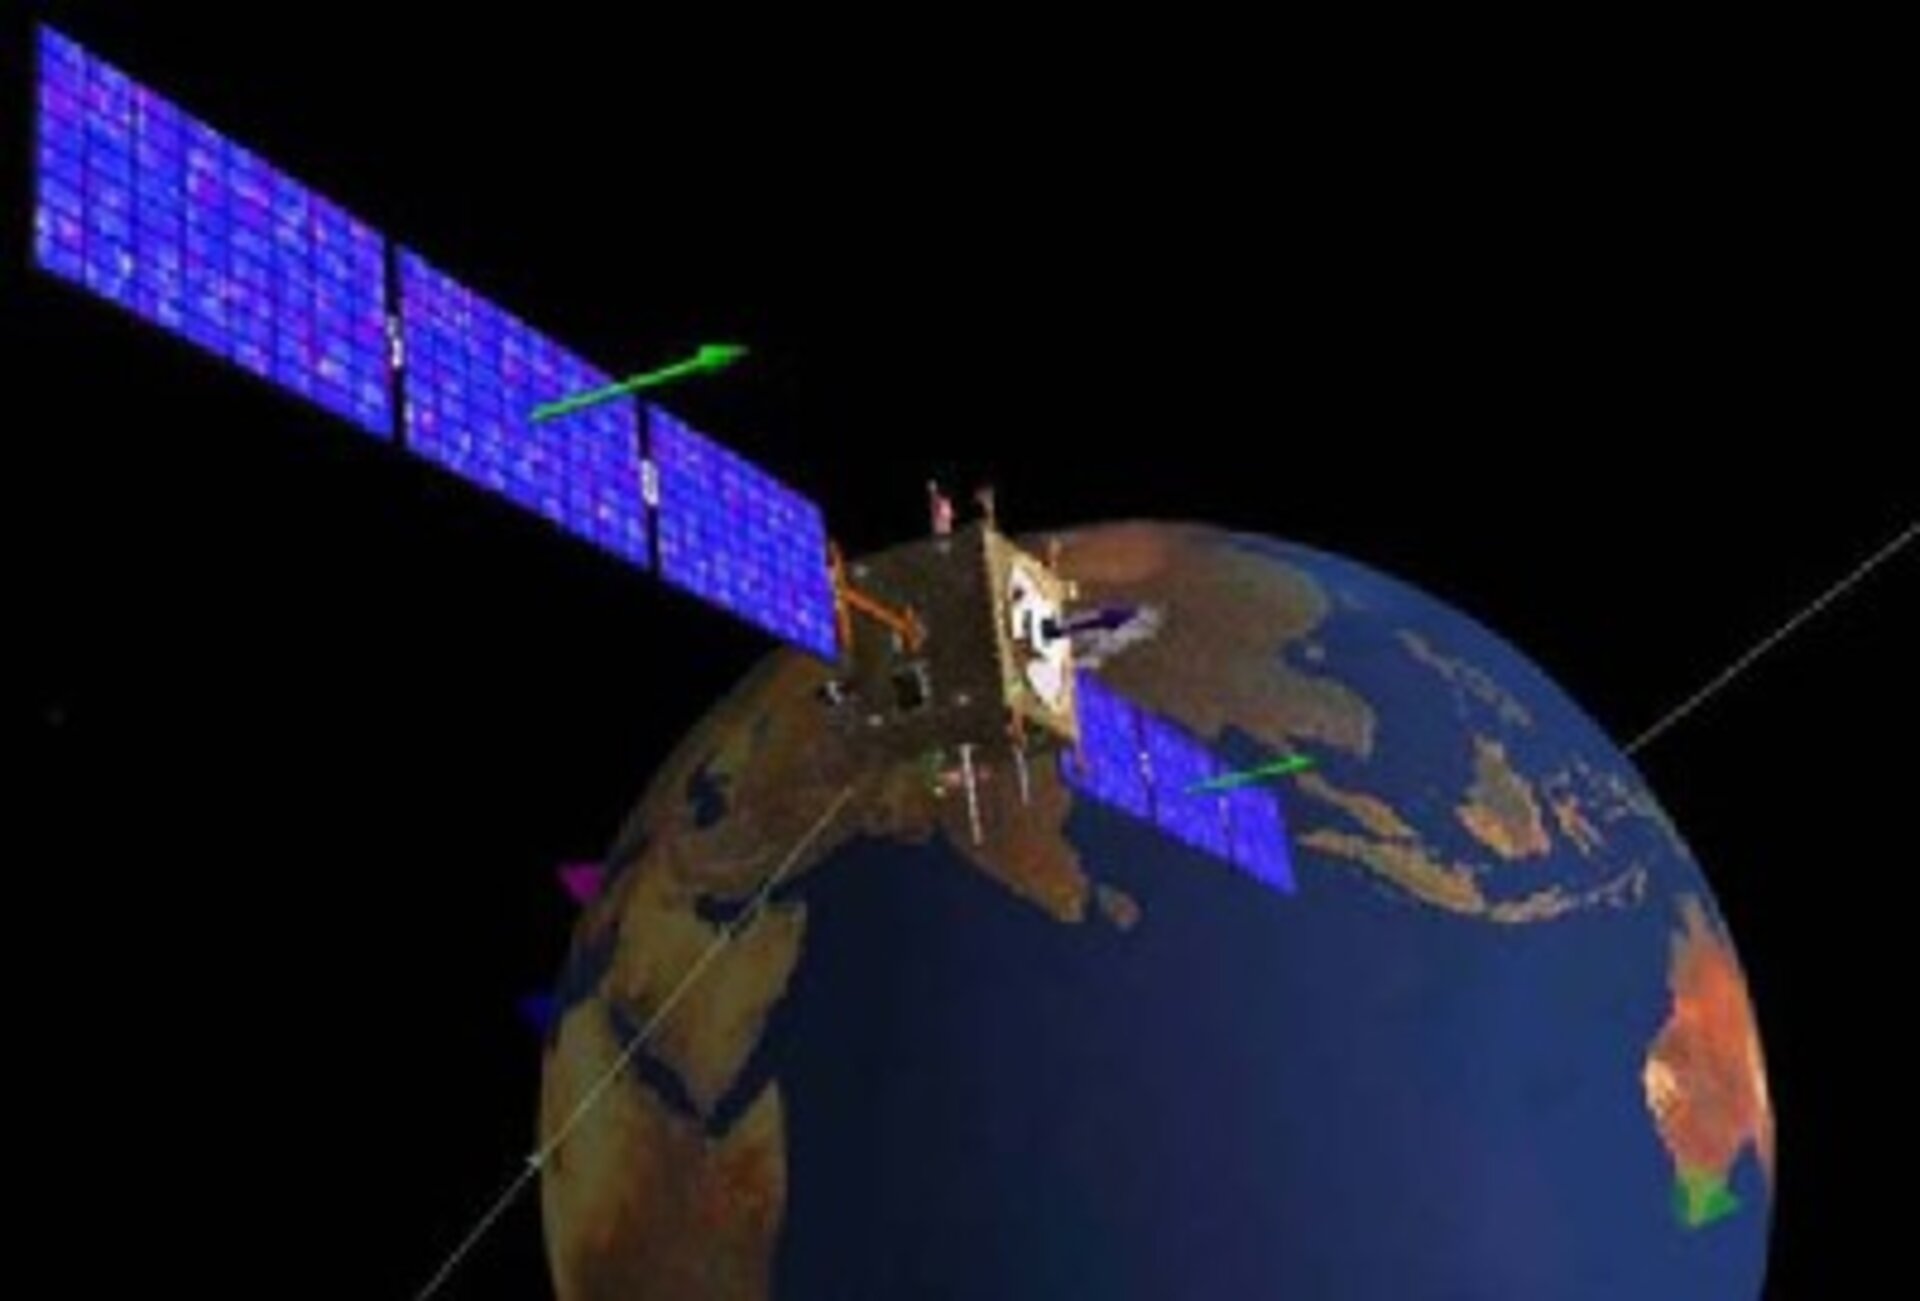 Visualisation of the Smart-1 spacecraft in Earth orbit just after launch